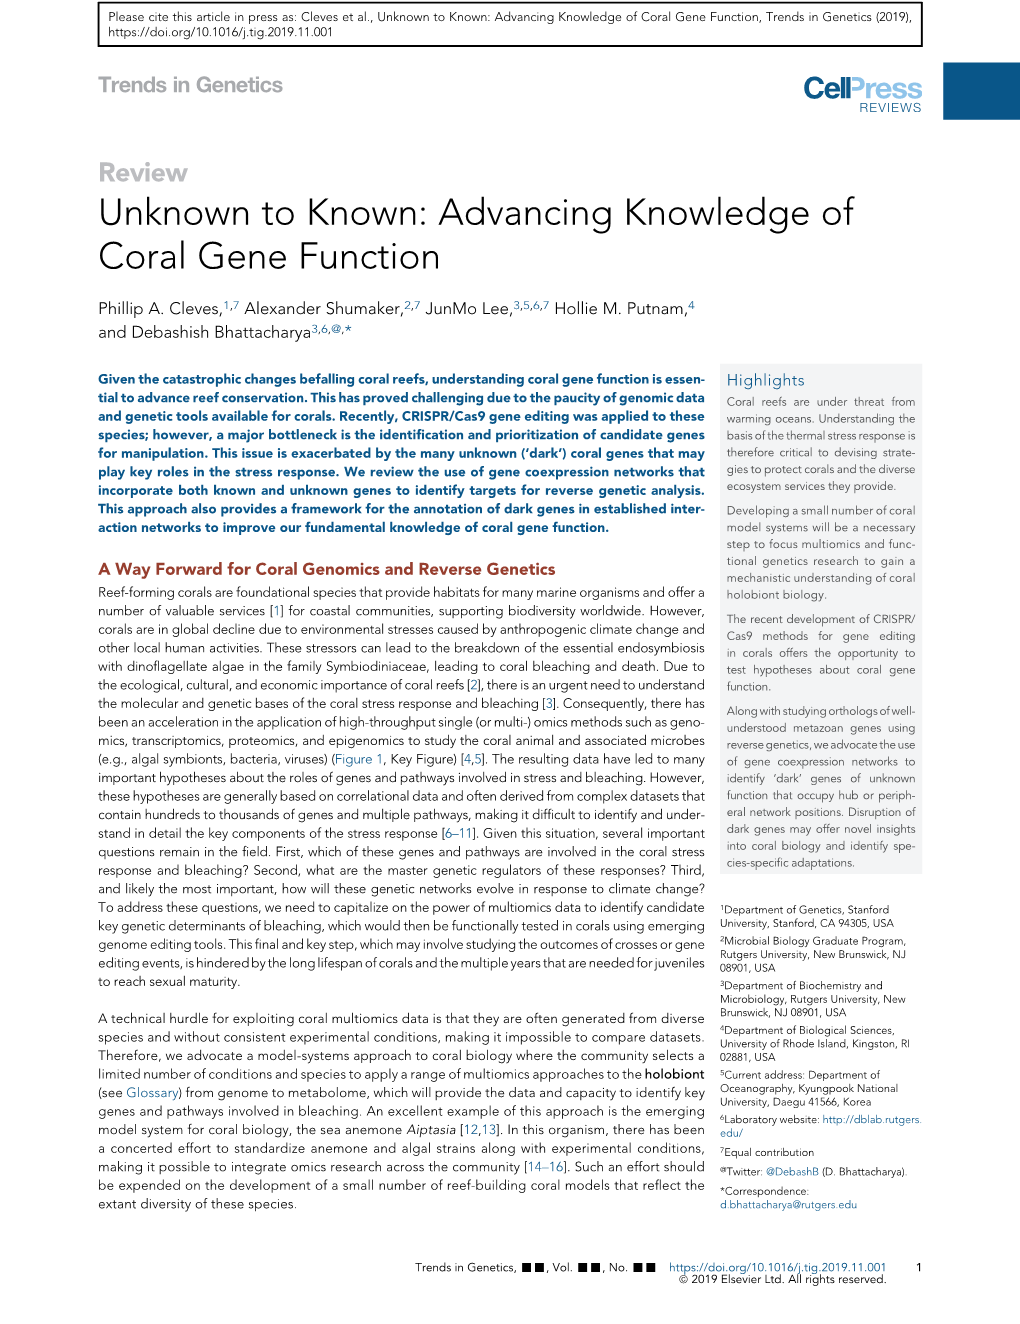 Unknown to Known: Advancing Knowledge of Coral Gene Function, Trends in Genetics (2019)